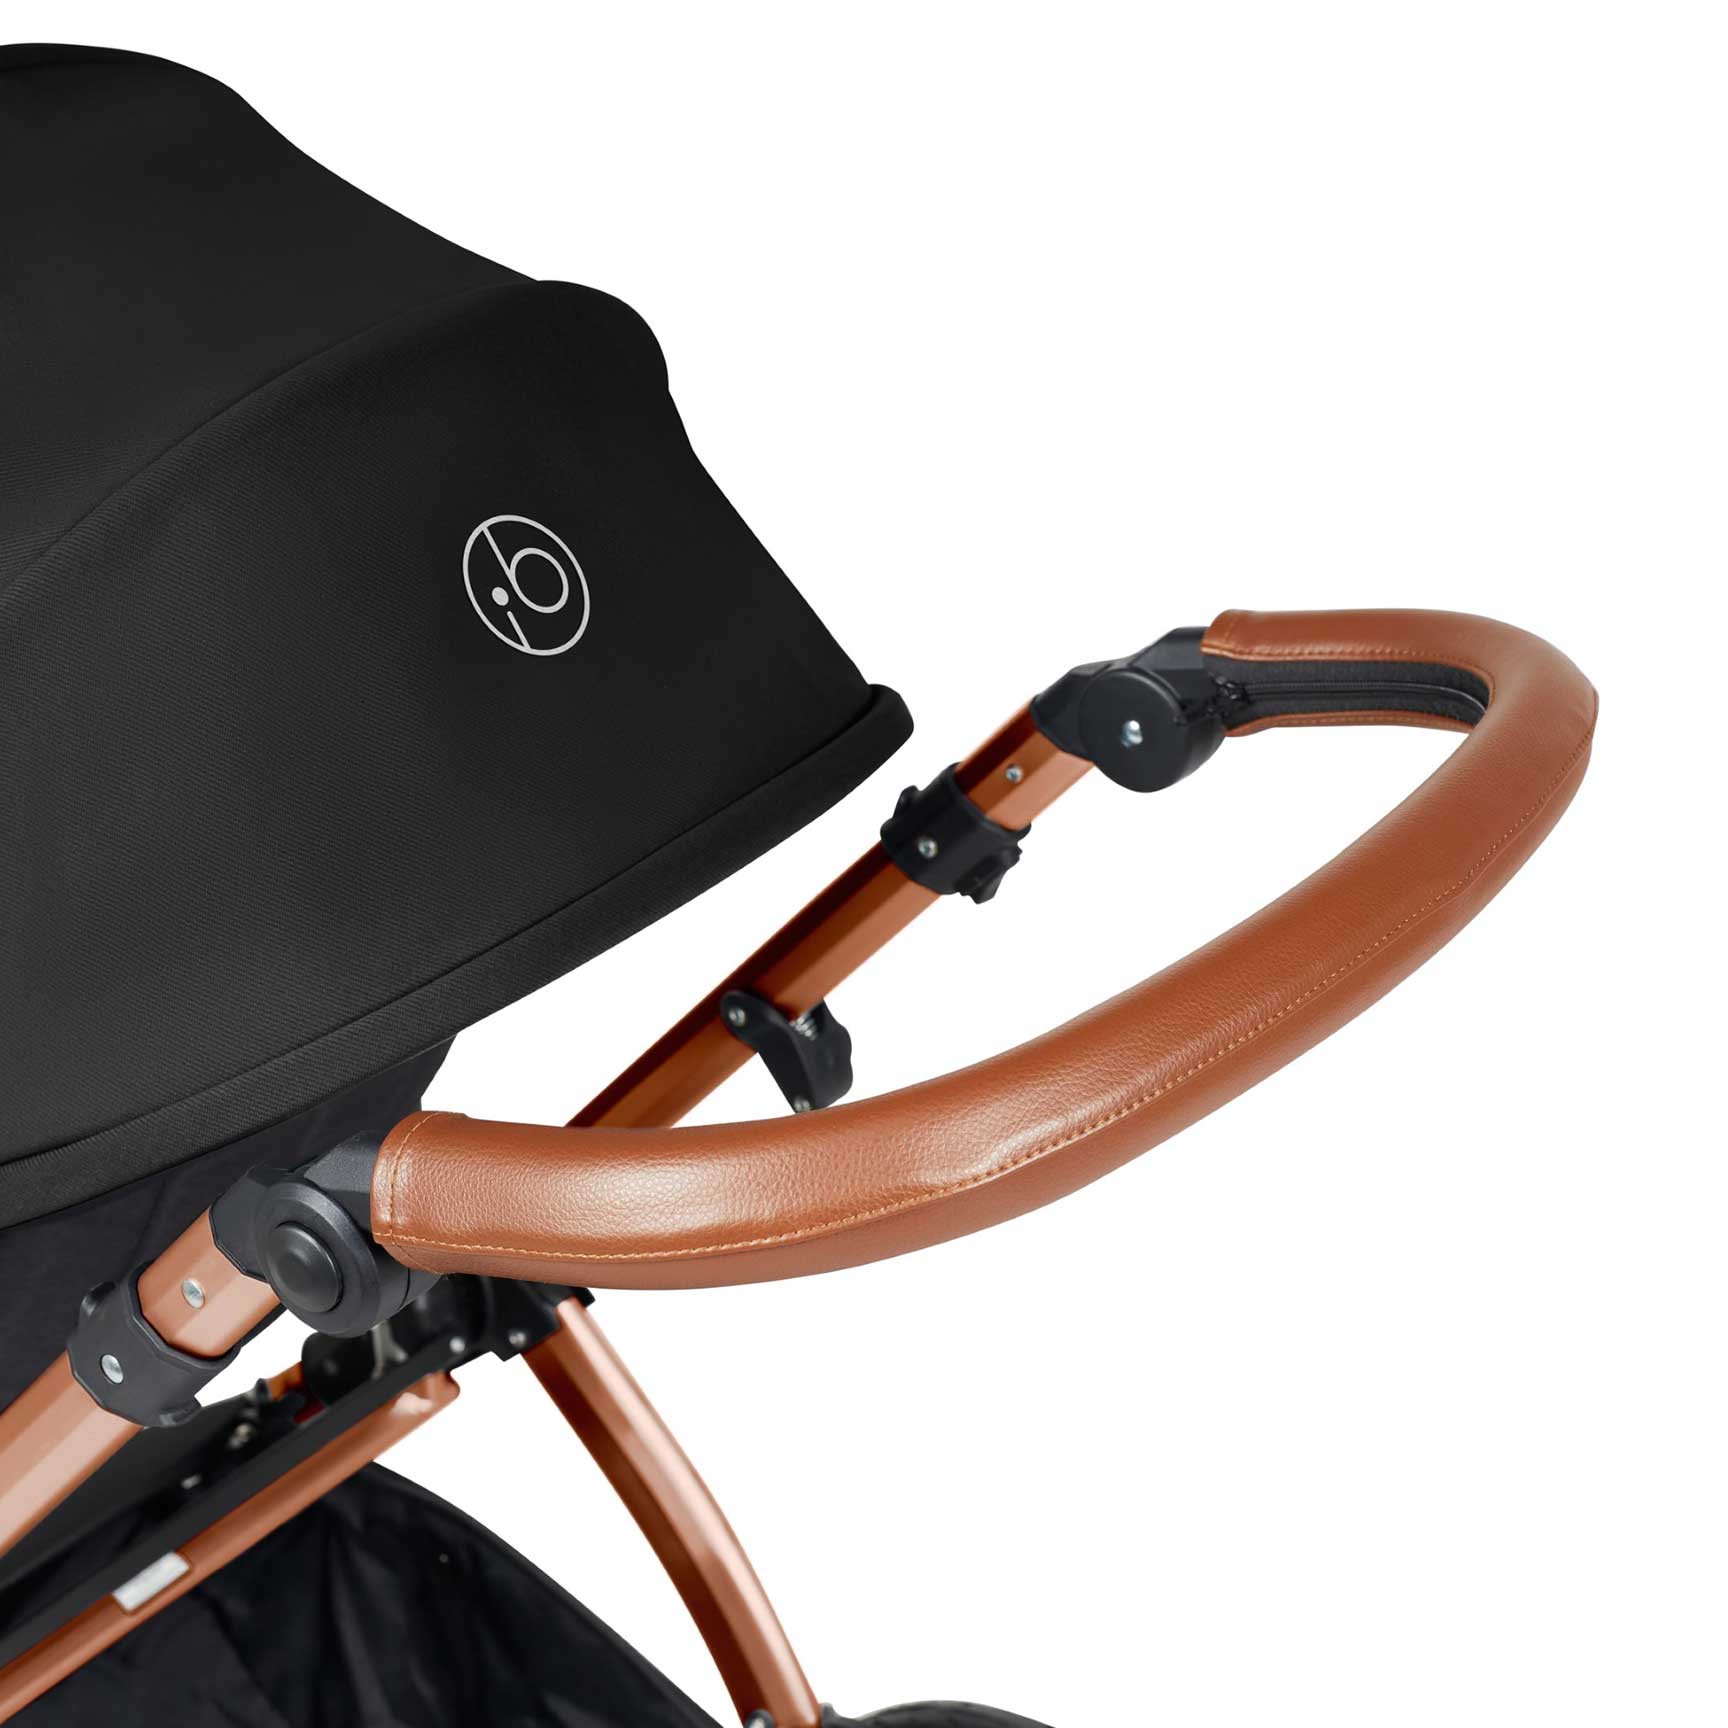 Ickle Bubba Stomp Luxe All-in-One Travel System with Isofix Base in Bronze/Midnight/Tan 10-011-300-021 5056515026603